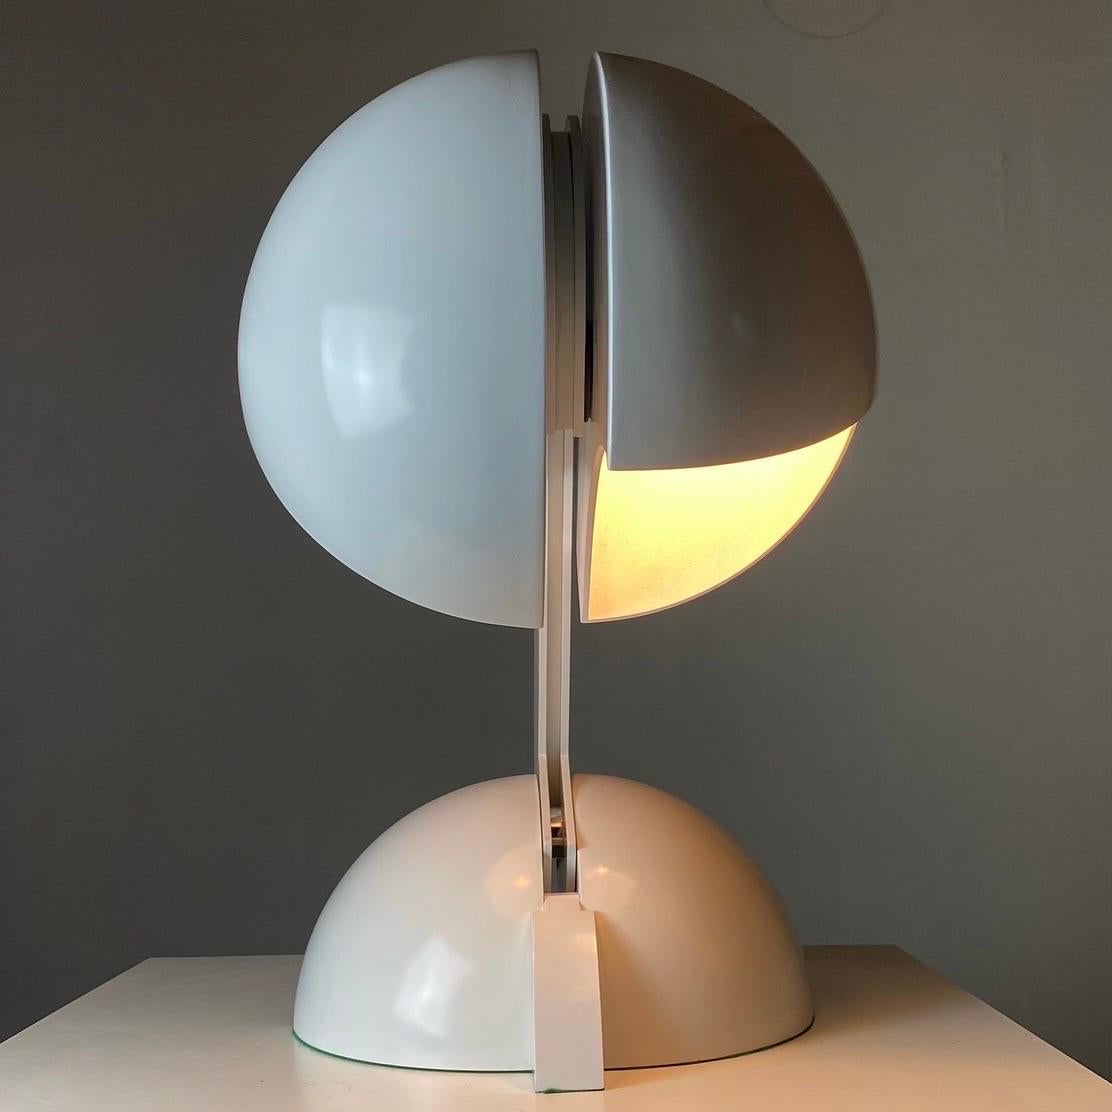 Ruspa Table Lamp by Gae Aulenti for Martinelli Luce, Italy 1970s In Good Condition For Sale In Haderslev, DK